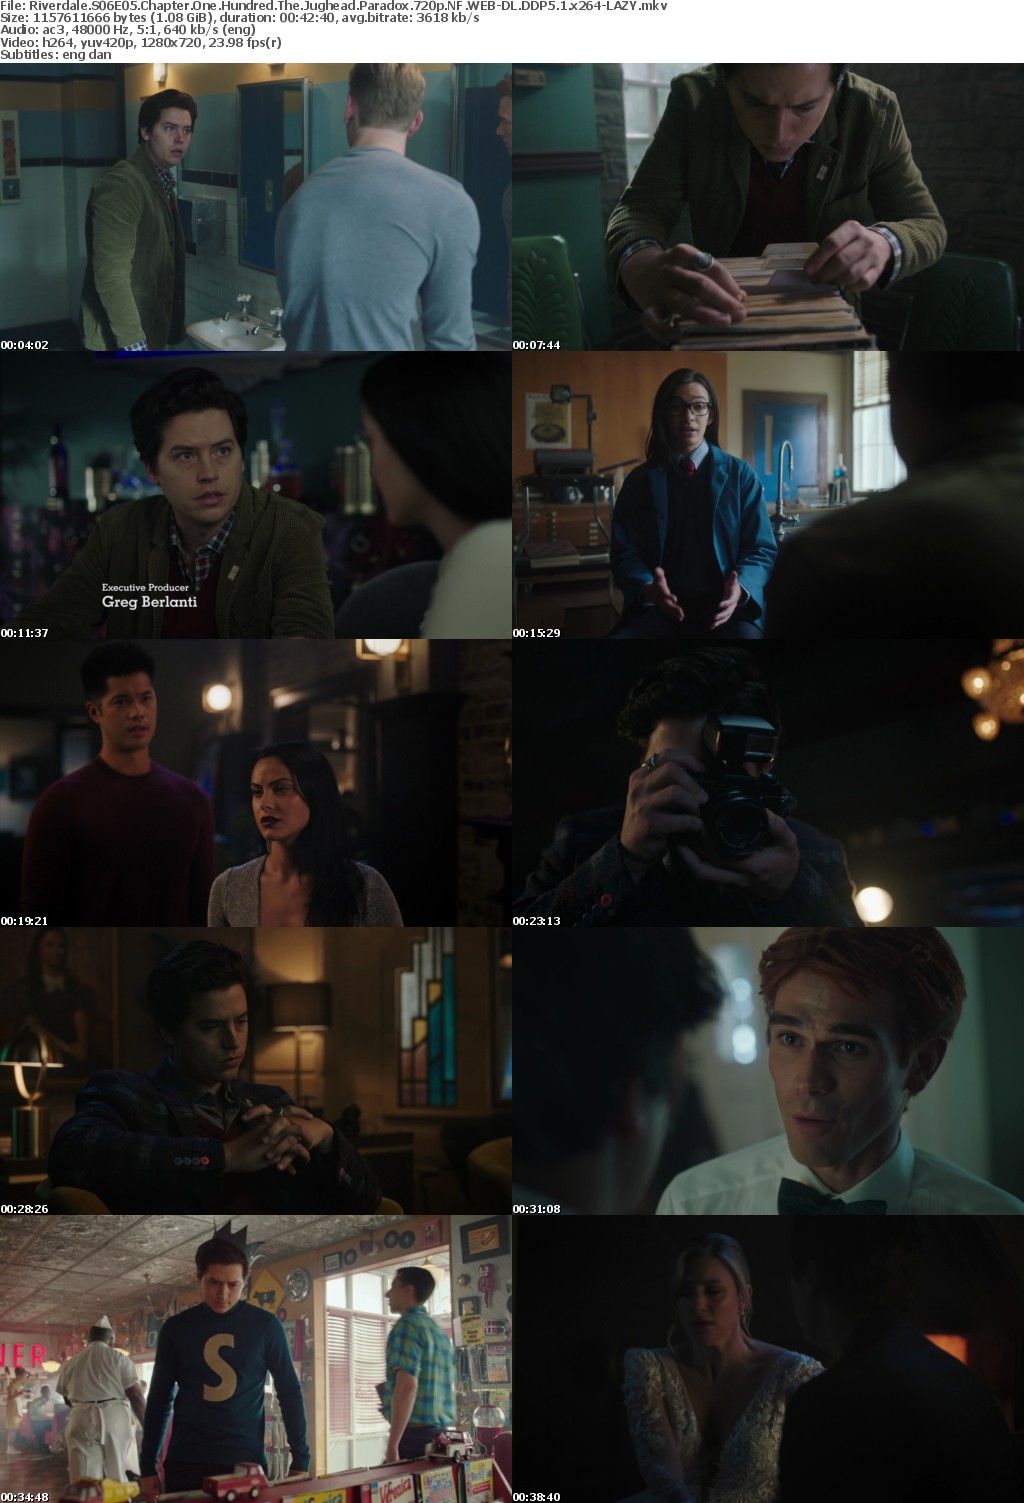 Riverdale US S06E05 Chapter One Hundred The Jughead Paradox 720p NF WEBRip DDP5 1 x264-LAZY